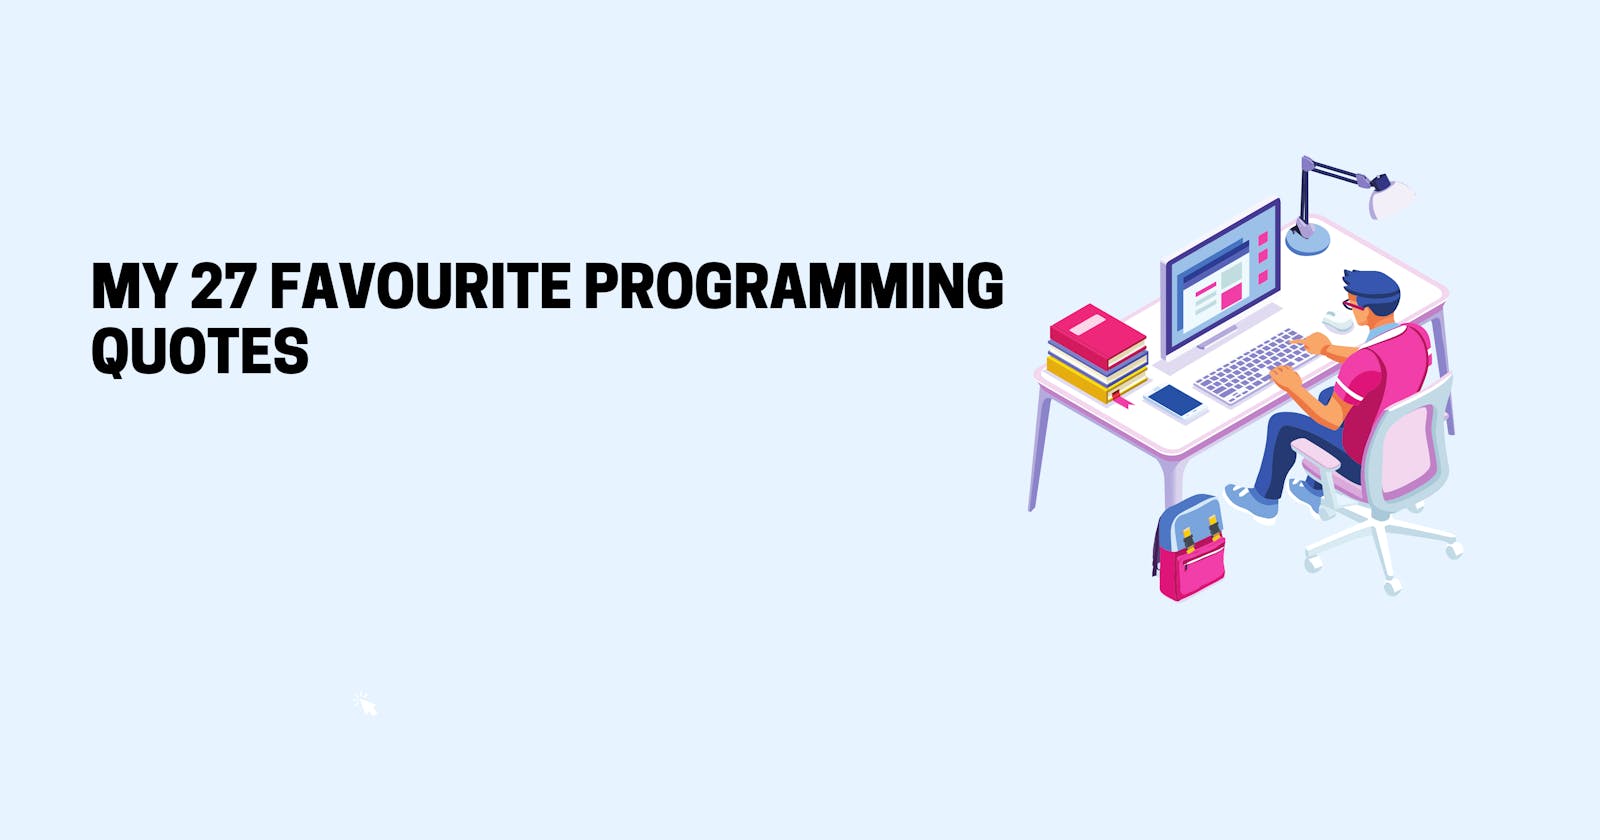 My 27 Favourite Programming Quotes